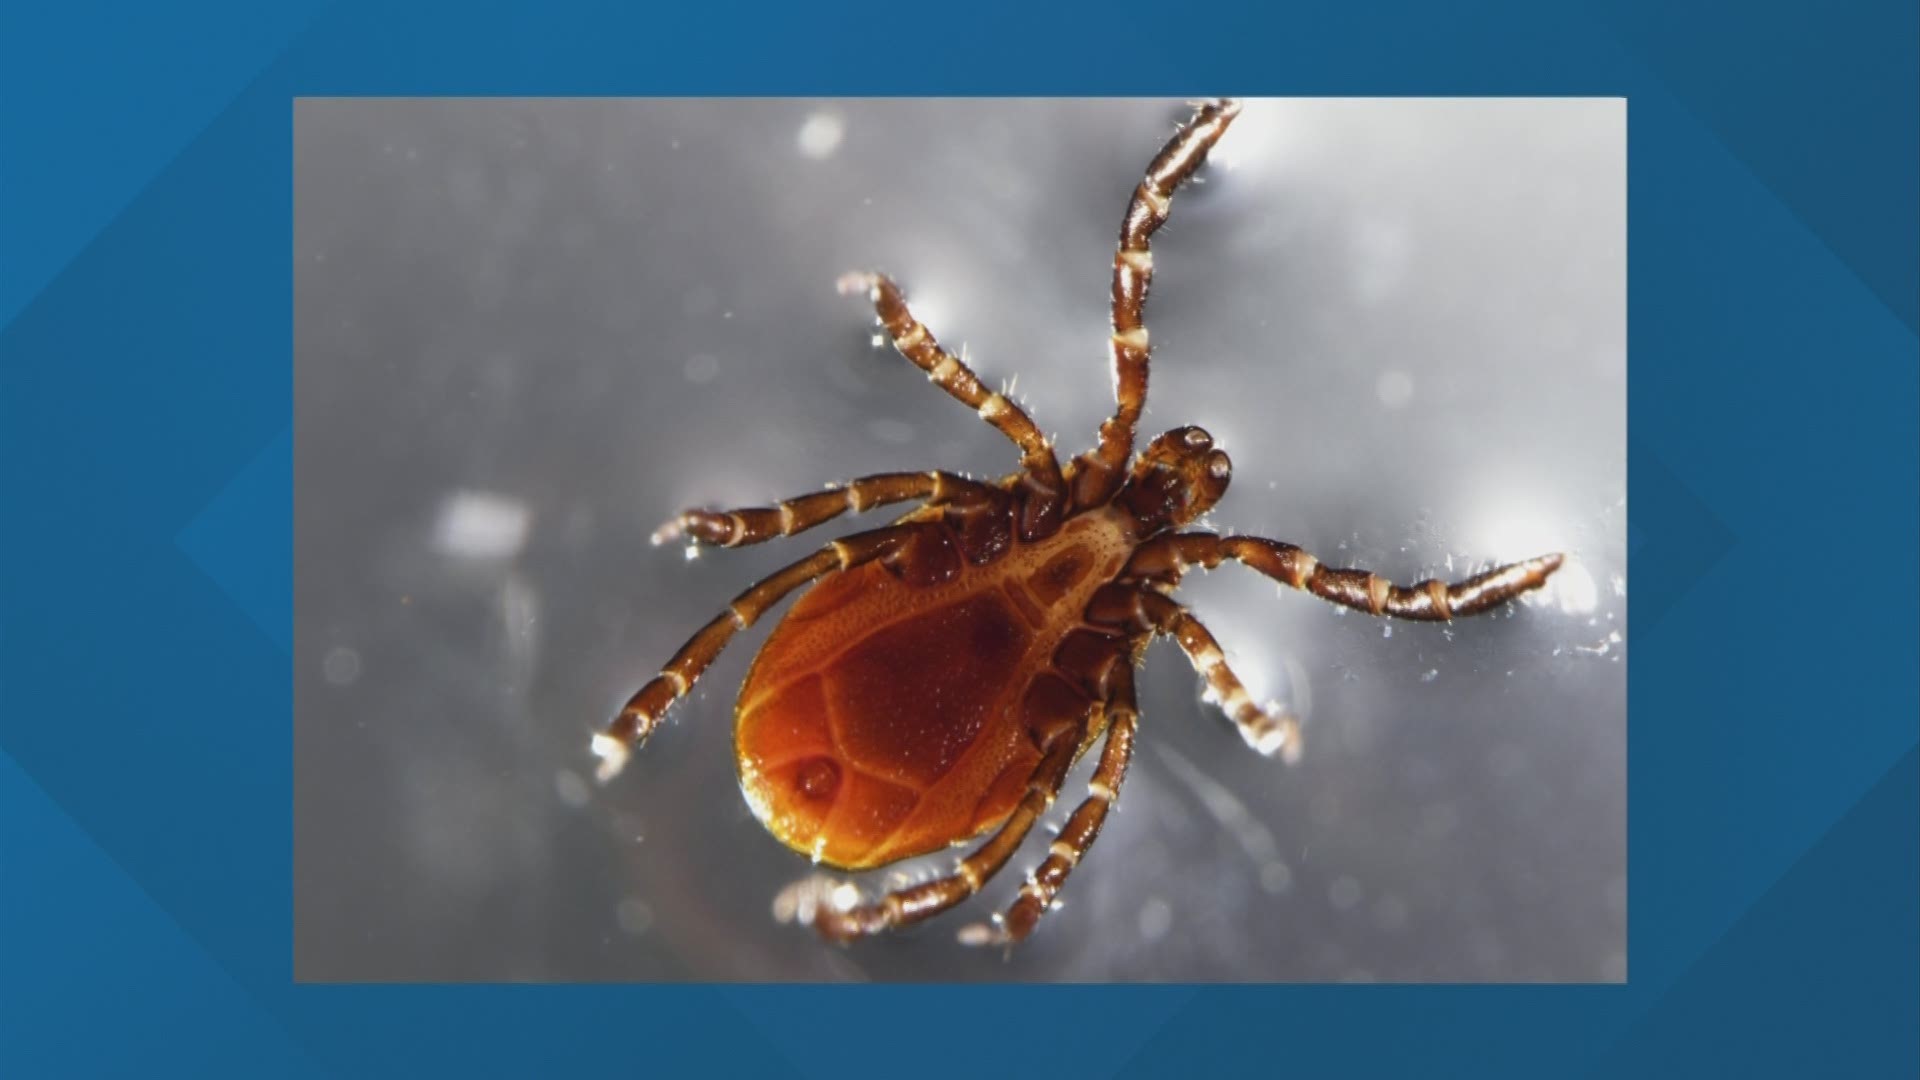 Ohio State veterinarians have seen more ticks in central Ohio over the past 10 years.